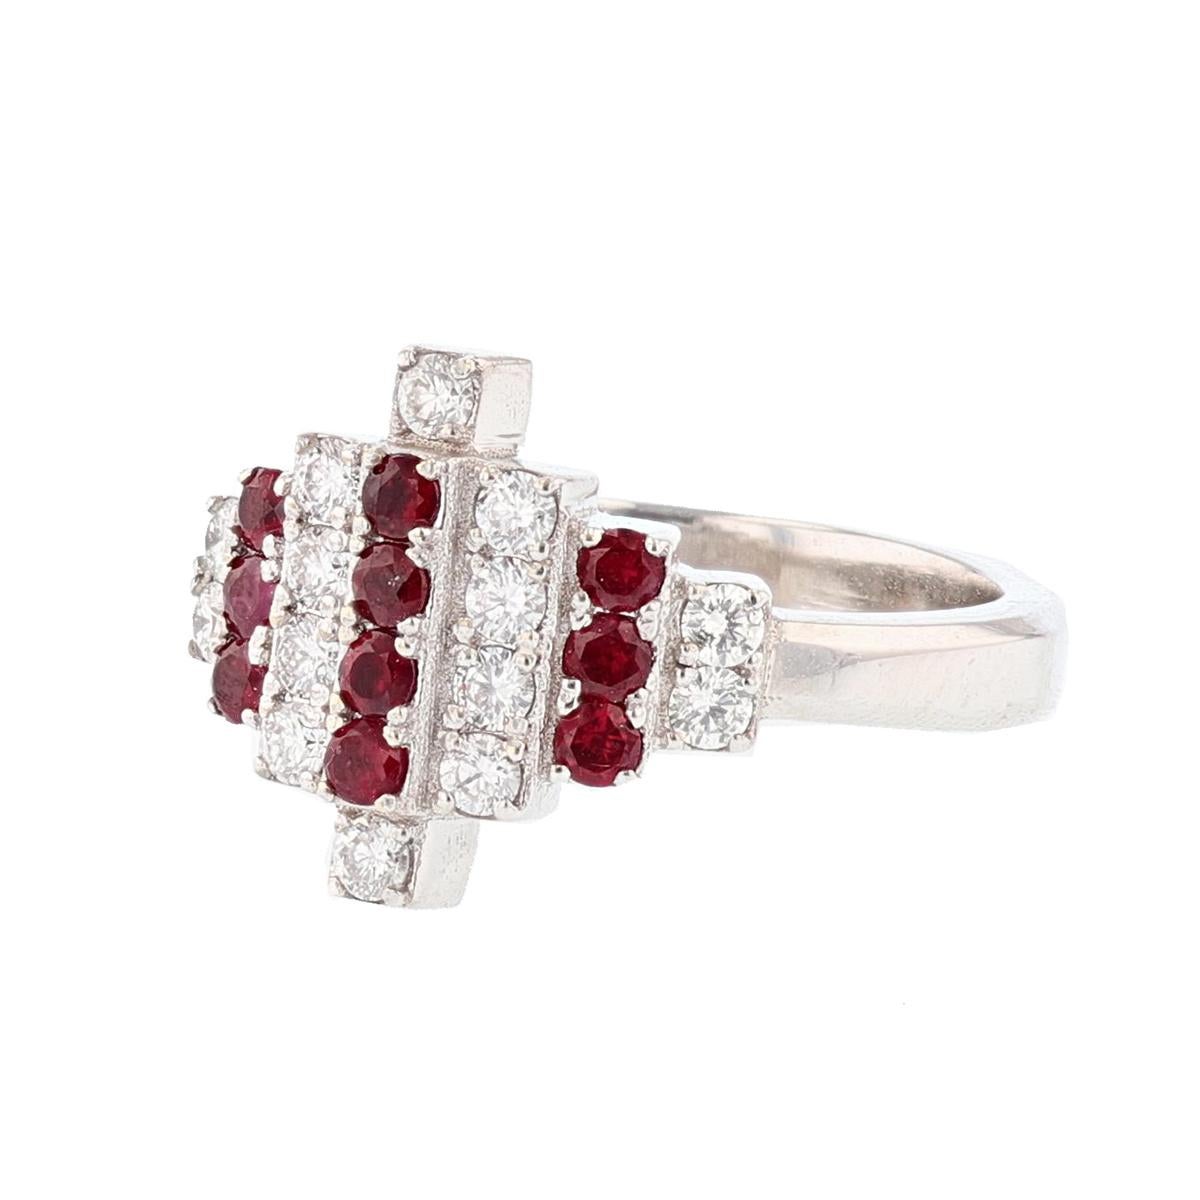 This ring is made in 18k white gold and features 10 round cut, prong set rubies weighing 0.35ct and 14 round cut, prong set diamonds weighing 0.38ct with a color grade (G) and clarity grade (SI1). 